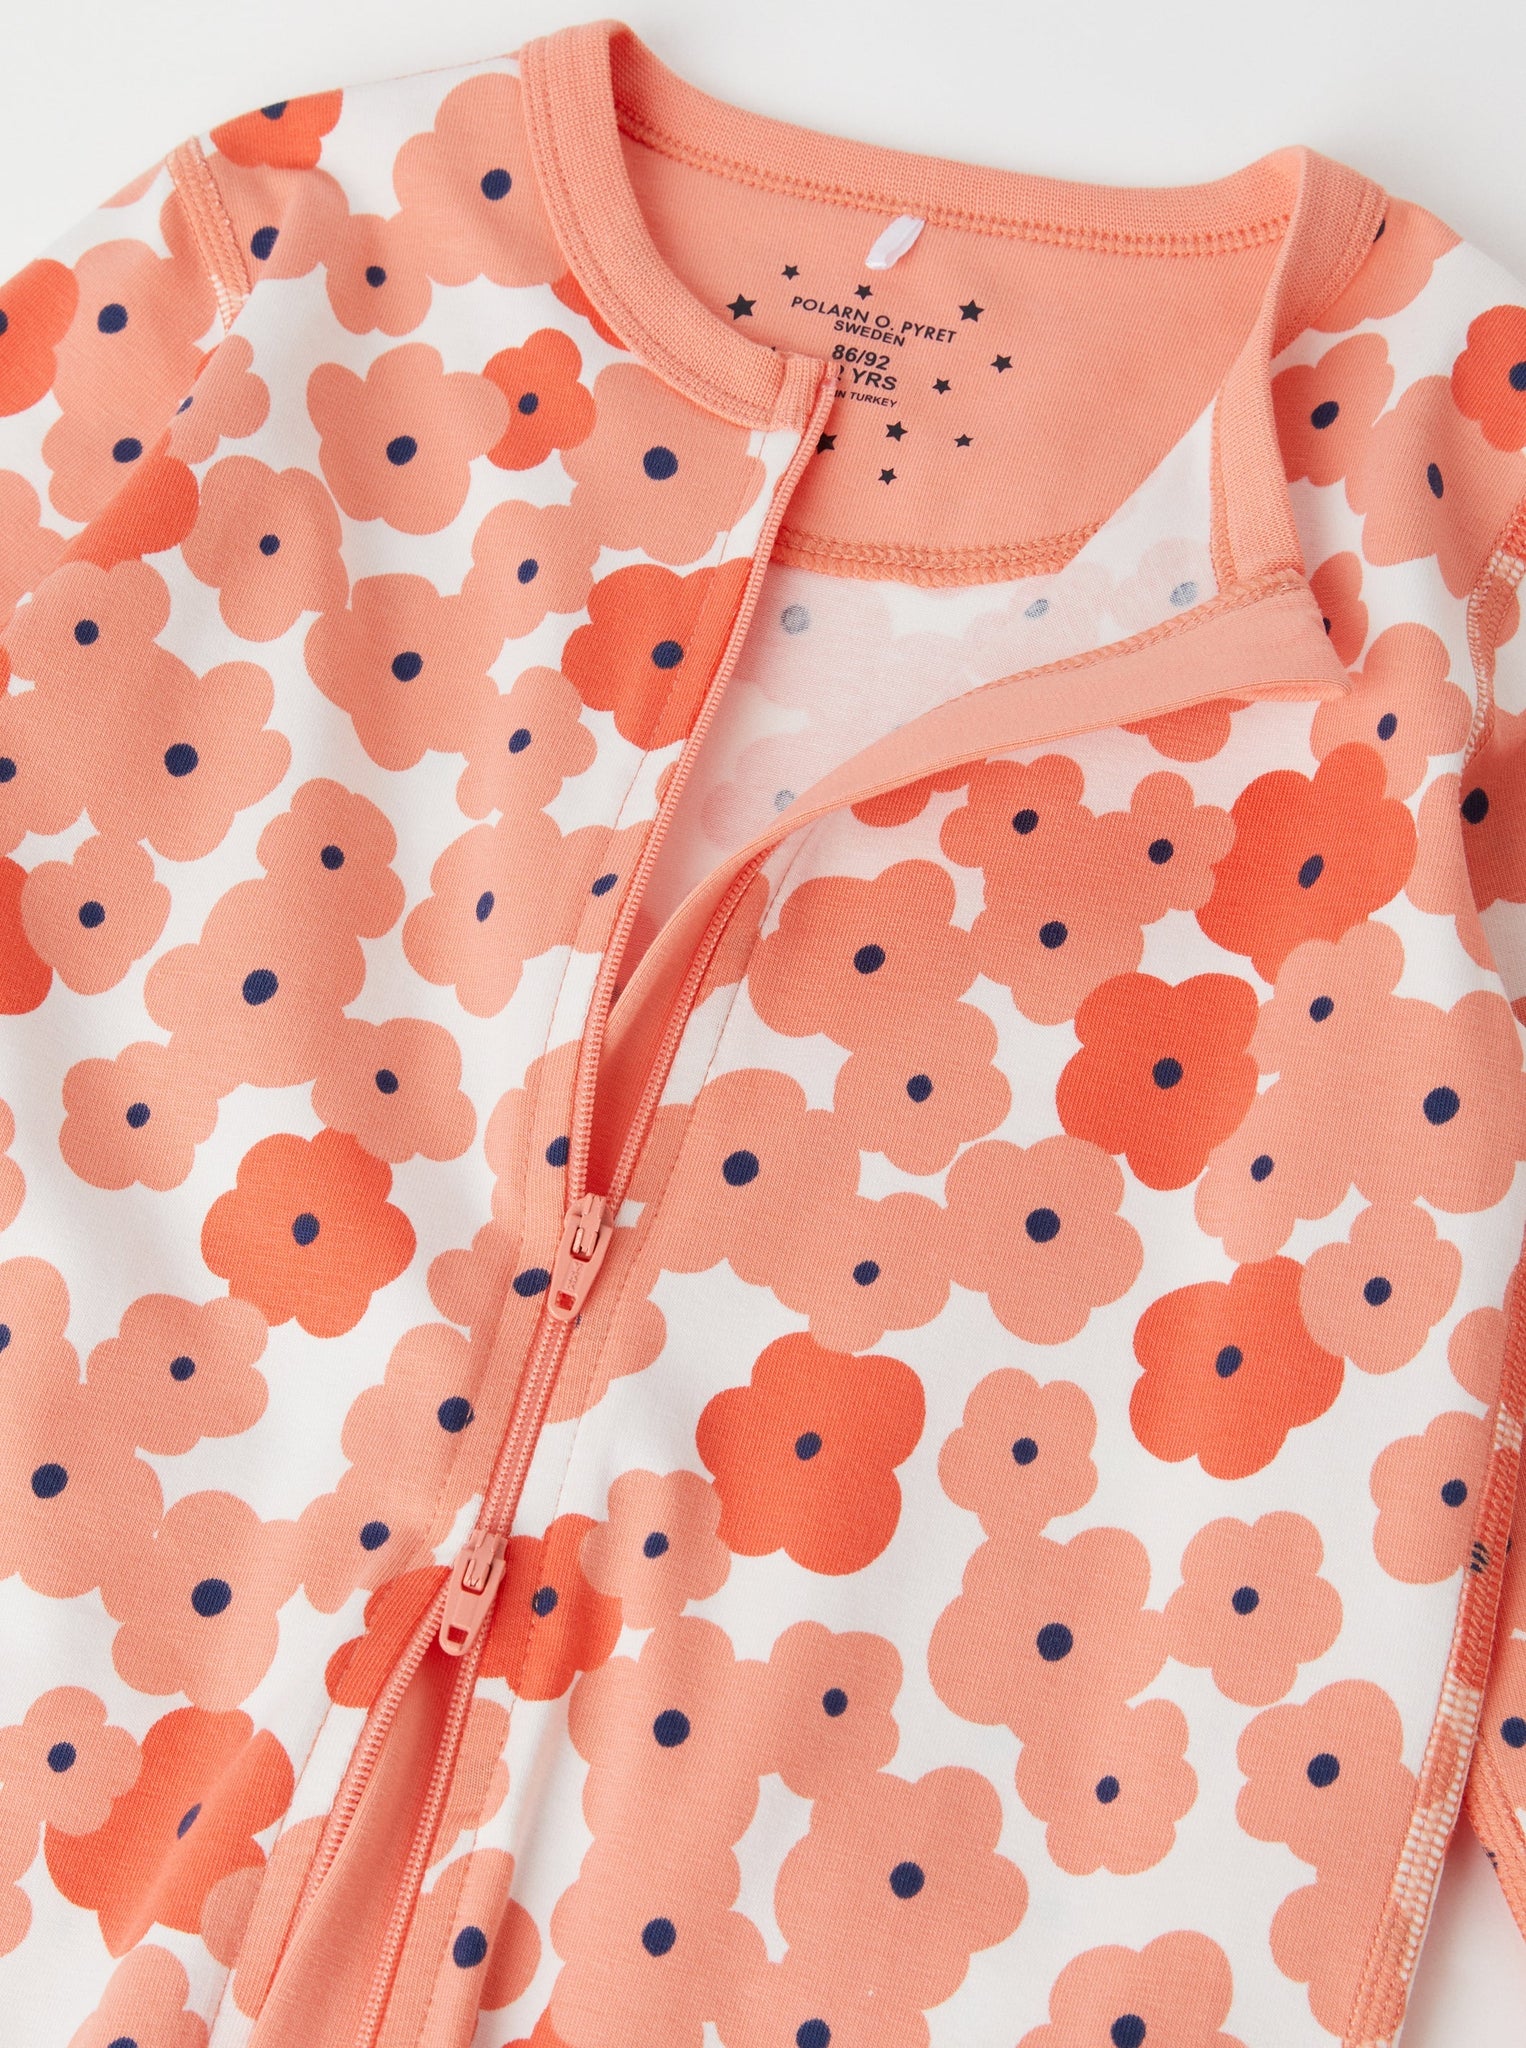 Floral Print Orange Kids Sleepsuit from the Polarn O. Pyret kidswear collection. The best ethical kids clothes